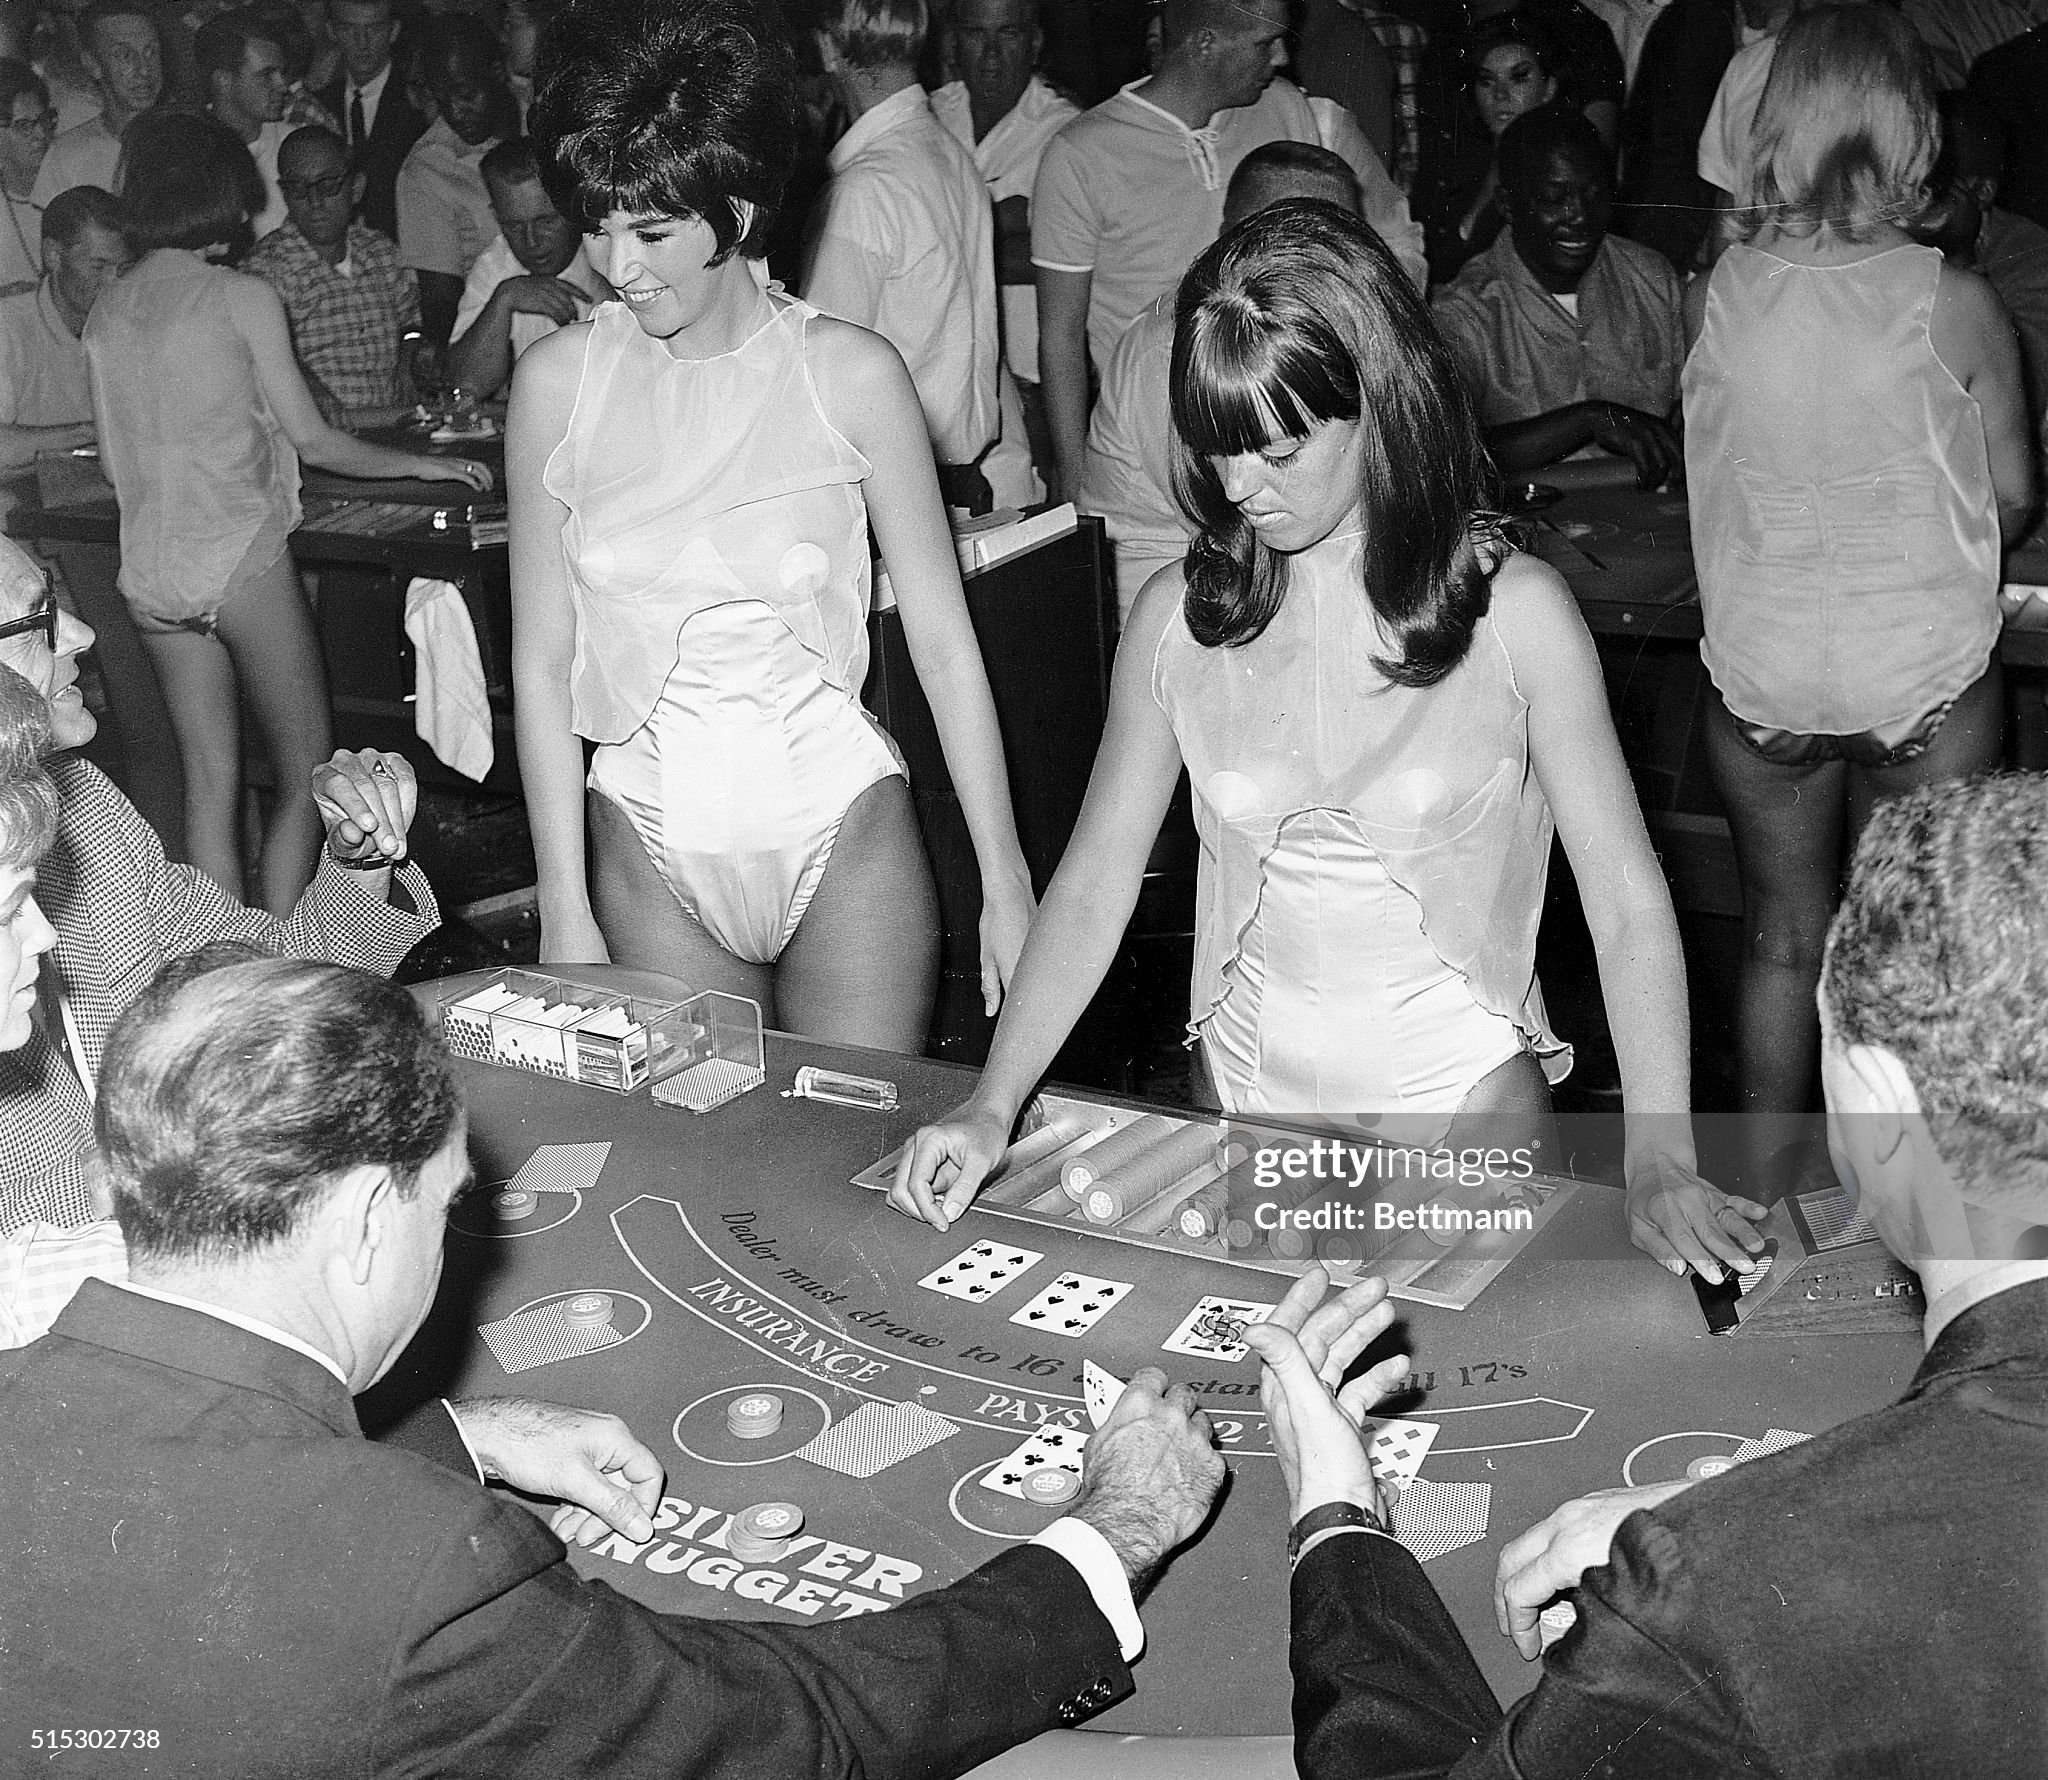 Black Jack dealers Dianne McMillin (left) and Jaye Boack work in the pit at the Silver Nugget Casino in Las Vegas on 16 April 1966, wearing costumes with see-through tops. The management brought the girls on the 1 to 8 AM shift, contending they were not topless (they had on chiffon transparent tops with pasties underneath) and, therefore, should not cause objections from the gaming commission or the Attorney General, who earlier said he would go to court to get an injunction against them. The women are shown dealing to a table of players. 